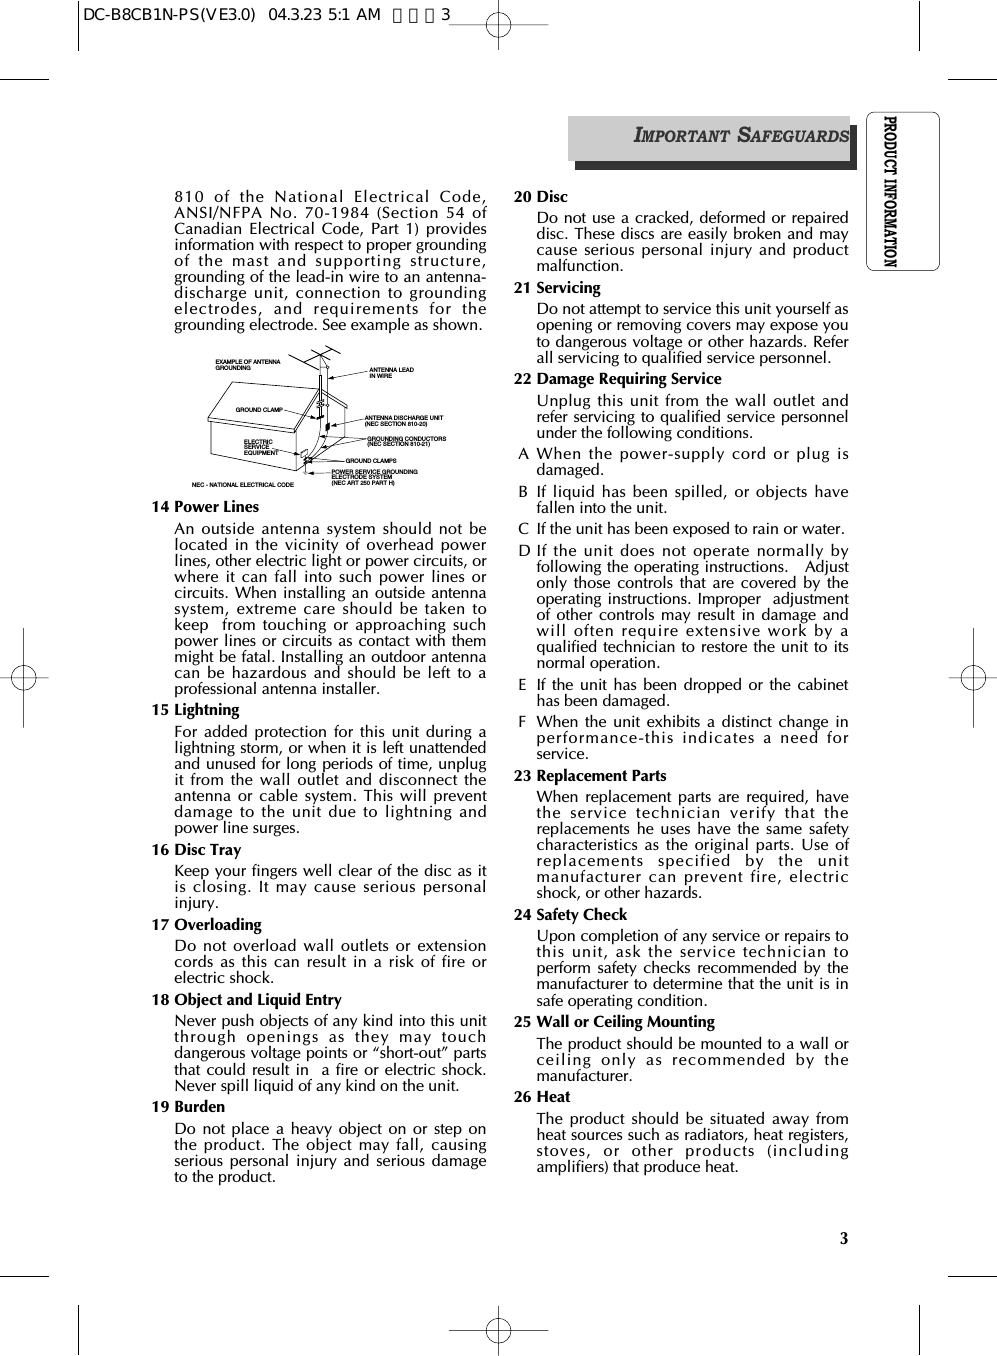 PRODUCT INFORMATION3810 of the National Electrical Code,ANSI/NFPA No. 70-1984 (Section 54 ofCanadian Electrical Code, Part 1) providesinformation with respect to proper groundingof the mast and supporting structure,grounding of the lead-in wire to an antenna-discharge unit, connection to groundingelectrodes, and requirements for thegrounding electrode. See example as shown.14 Power LinesAn outside antenna system should not belocated in the vicinity of overhead powerlines, other electric light or power circuits, orwhere it can fall into such power lines orcircuits. When installing an outside antennasystem, extreme care should be taken tokeep  from touching or approaching suchpower lines or circuits as contact with themmight be fatal. Installing an outdoor antennacan be hazardous and should be left to aprofessional antenna installer.15 LightningFor added protection for this unit during alightning storm, or when it is left unattendedand unused for long periods of time, unplugit from the wall outlet and disconnect theantenna or cable system. This will preventdamage to the unit due to lightning andpower line surges. 16 Disc TrayKeep your fingers well clear of the disc as itis closing. It may cause serious personalinjury.17 OverloadingDo not overload wall outlets or extensioncords as this can result in a risk of fire orelectric shock. 18 Object and Liquid EntryNever push objects of any kind into this unitthrough openings as they may touchdangerous voltage points or “short-out” partsthat could result in  a fire or electric shock.Never spill liquid of any kind on the unit.19 BurdenDo not place a heavy object on or step onthe product. The object may fall, causingserious personal injury and serious damageto the product.20 DiscDo not use a cracked, deformed or repaireddisc. These discs are easily broken and maycause serious personal injury and productmalfunction.21 ServicingDo not attempt to service this unit yourself asopening or removing covers may expose youto dangerous voltage or other hazards. Referall servicing to qualified service personnel.22 Damage Requiring ServiceUnplug this unit from the wall outlet andrefer servicing to qualified service personnelunder the following conditions.A When the power-supply cord or plug isdamaged.B If liquid has been spilled, or objects havefallen into the unit.C If the unit has been exposed to rain or water. D If the unit does not operate normally byfollowing the operating instructions.   Adjustonly those controls that are covered by theoperating instructions. Improper  adjustmentof other controls may result in damage andwill often require extensive work by aqualified technician to restore the unit to itsnormal operation.E If the unit has been dropped or the cabinethas been damaged.F When the unit exhibits a distinct change inperformance-this indicates a need forservice.  23 Replacement PartsWhen replacement parts are required, havethe service technician verify that thereplacements he uses have the same safetycharacteristics as the original parts. Use ofreplacements specified by the unitmanufacturer can prevent fire, electricshock, or other hazards.24 Safety Check Upon completion of any service or repairs tothis unit, ask the service technician toperform safety checks recommended by themanufacturer to determine that the unit is insafe operating condition.25 Wall or Ceiling MountingThe product should be mounted to a wall orceiling only as recommended by themanufacturer.26 HeatThe product should be situated away fromheat sources such as radiators, heat registers,stoves, or other products (includingamplifiers) that produce heat.ANTENNA DISCHARGE UNIT(NEC SECTION 810-20)ANTENNA LEADIN WIREPOWER SERVICE GROUNDINGELECTRODE SYSTEM(NEC ART 250 PART H)GROUND CLAMPELECTRICSERVICEEQUIPMENTGROUNDING CONDUCTORS(NEC SECTION 810-21)GROUND CLAMPSEXAMPLE OF ANTENNA GROUNDING NEC - NATIONAL ELECTRICAL CODEIMPORTANT SAFEGUARDSDC-B8CB1N-PS(VE3.0)  04.3.23 5:1 AM  페이지3